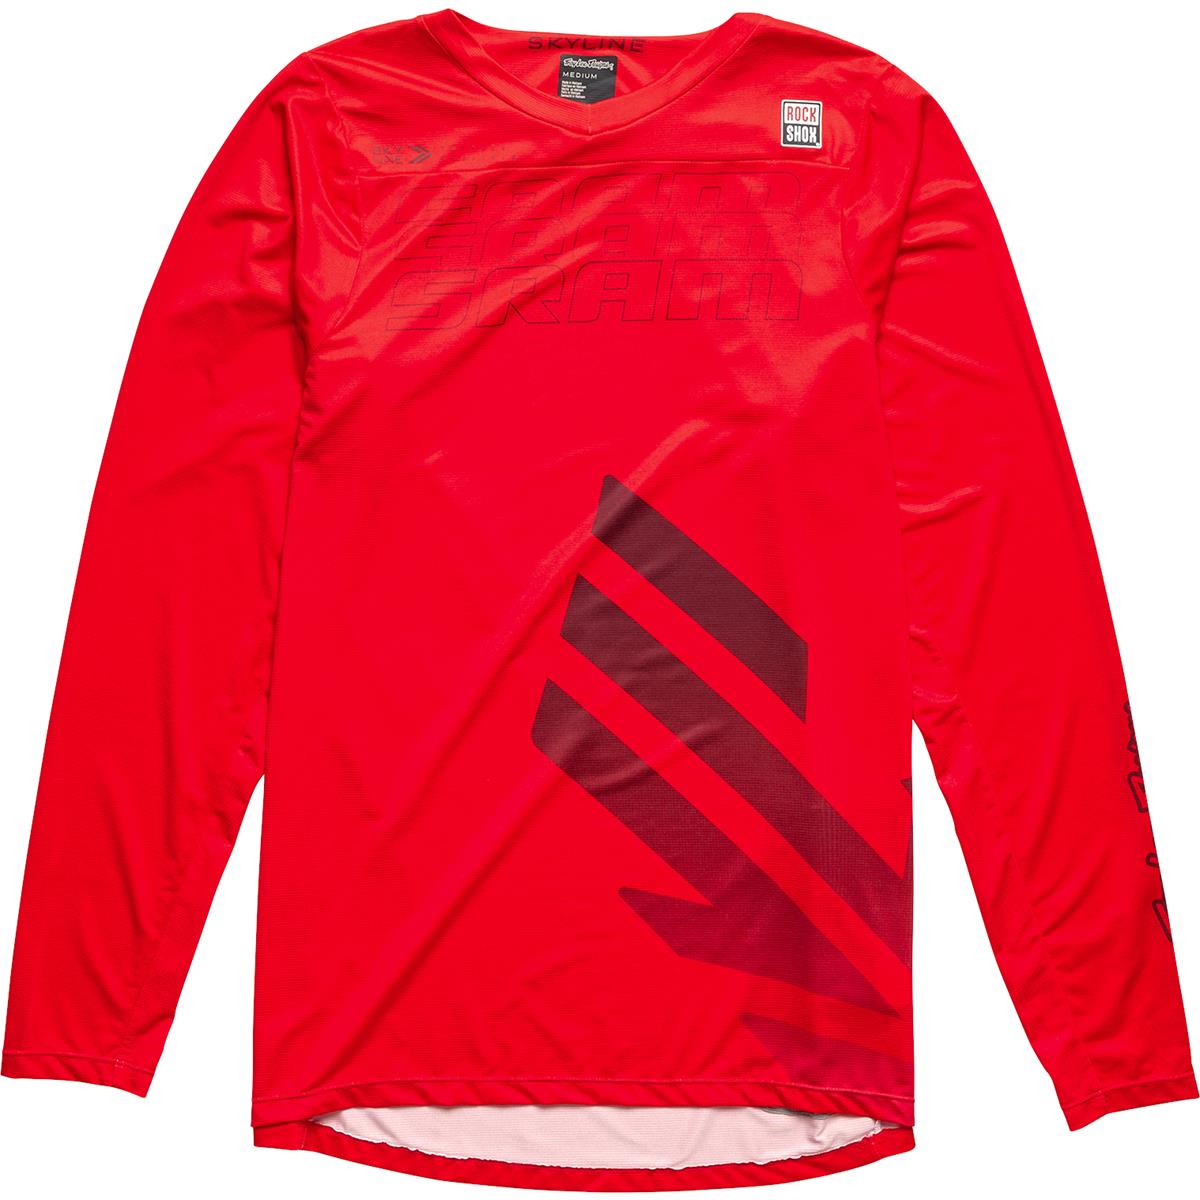 Troy Lee Designs Maillot VTT manches longues Skyline Sram - Eagle One Fiery Red